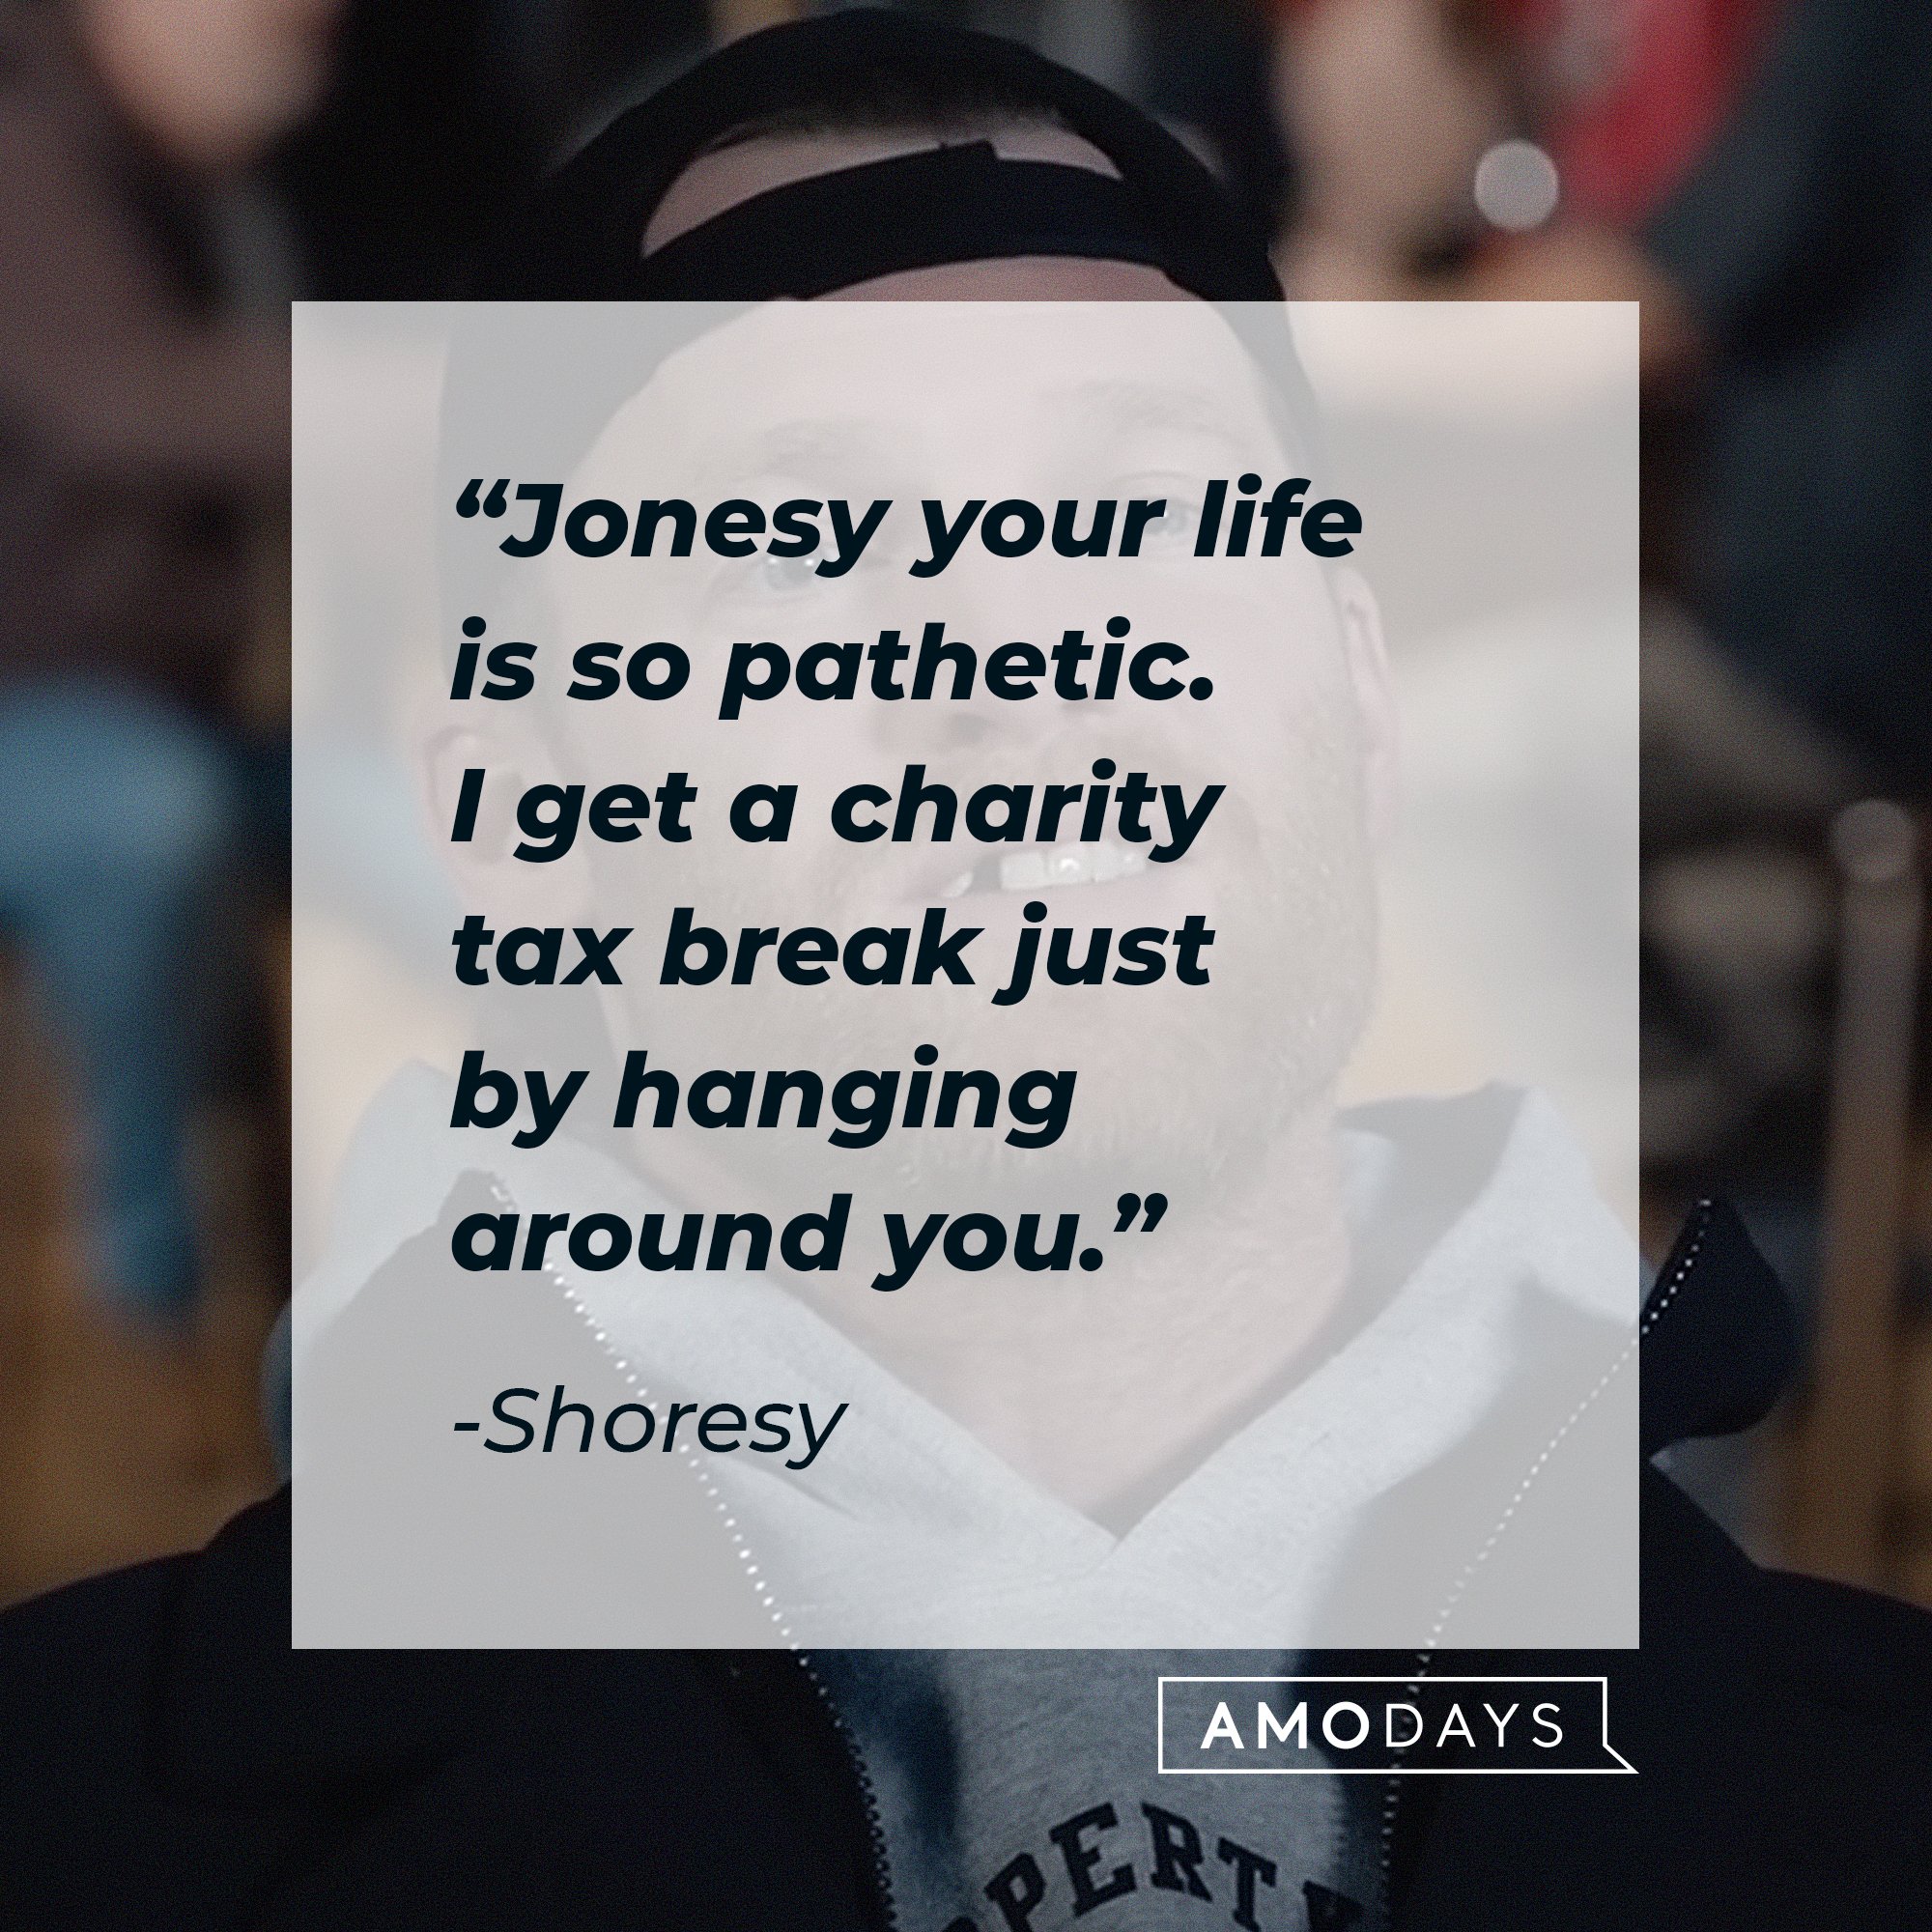 Shoresy’s quote: “Jonesy your life is so pathetic I get a charity tax break just by hanging around you." | Image: AmoDays